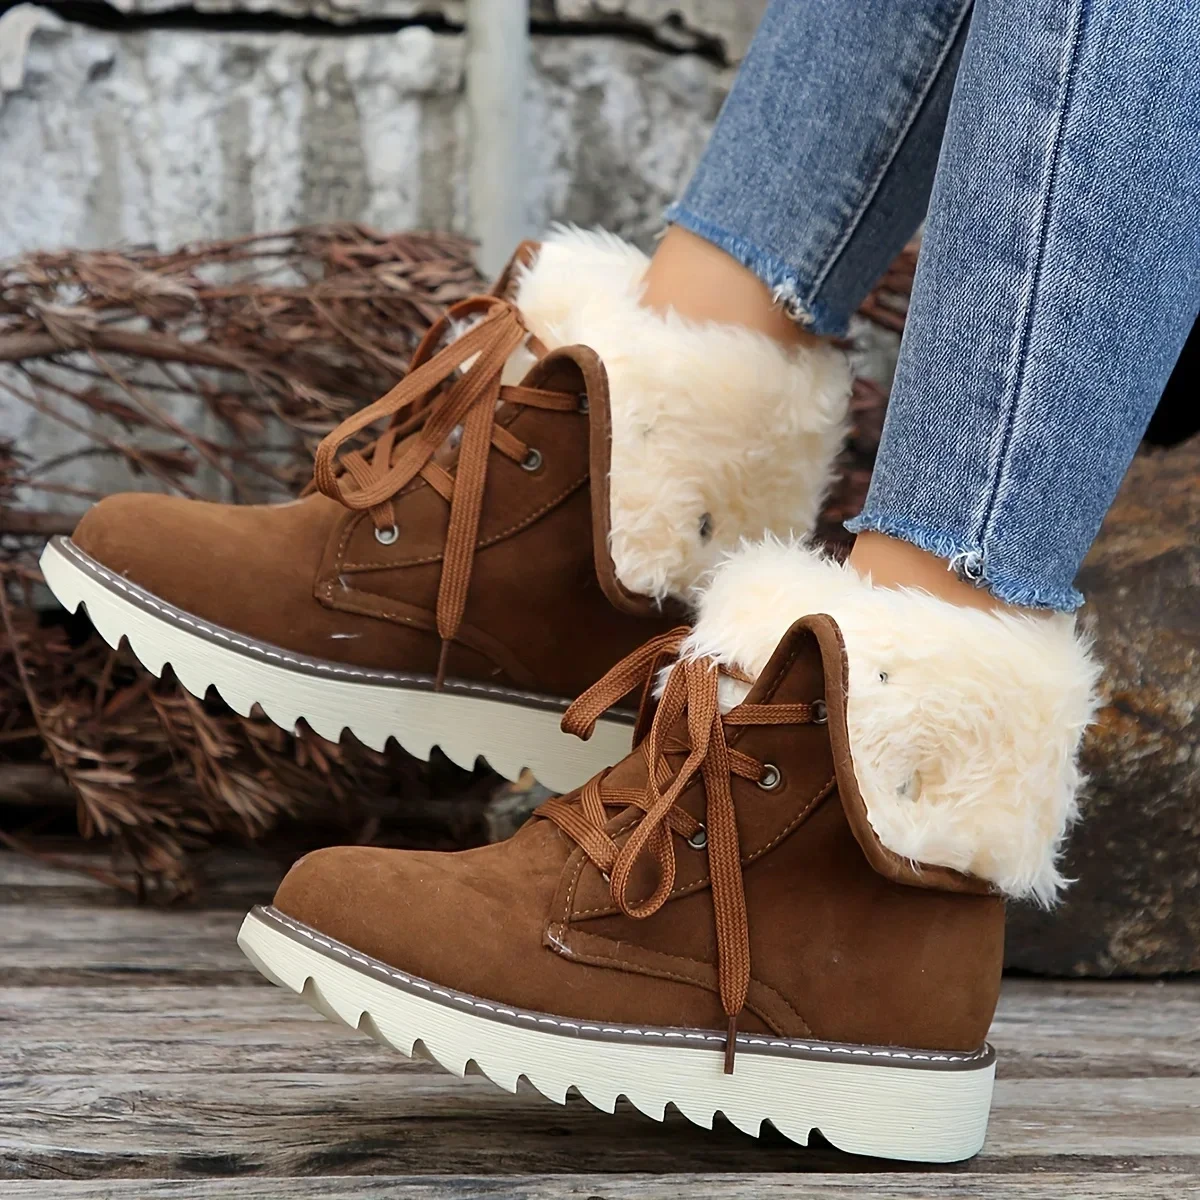 

Women Solid Color Fluffy Boots Lace Up Soft Sole Platform Warm Lined Boots Fold Over Non-slip Snow Boots Comfortable Ankle Boots